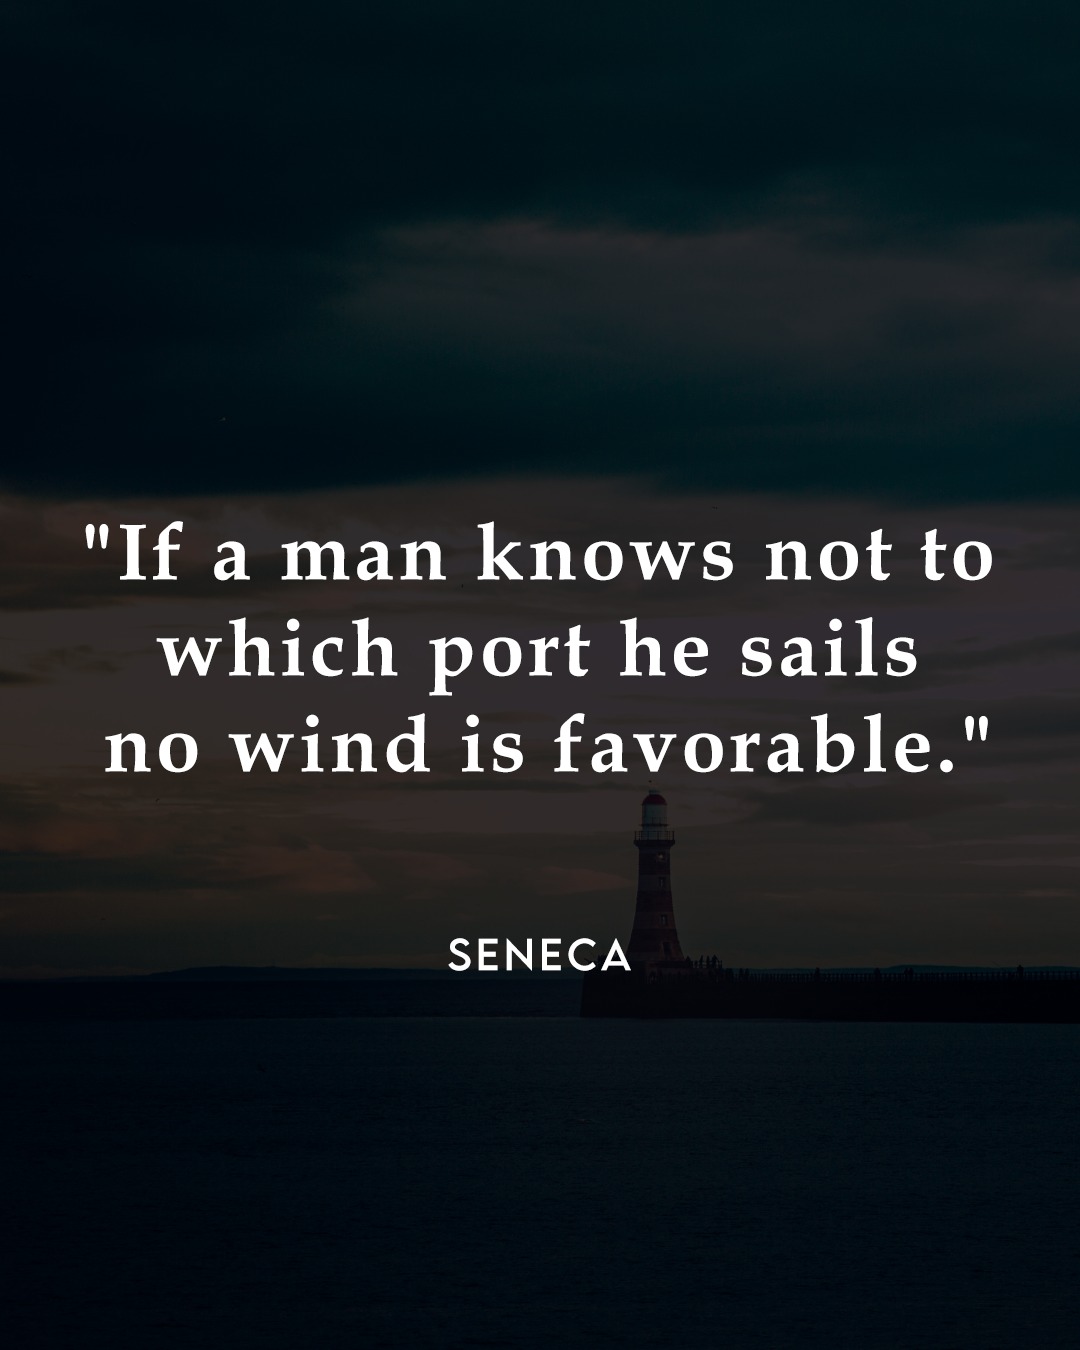 If a man knows not to which port he sails, no wind is favorable.